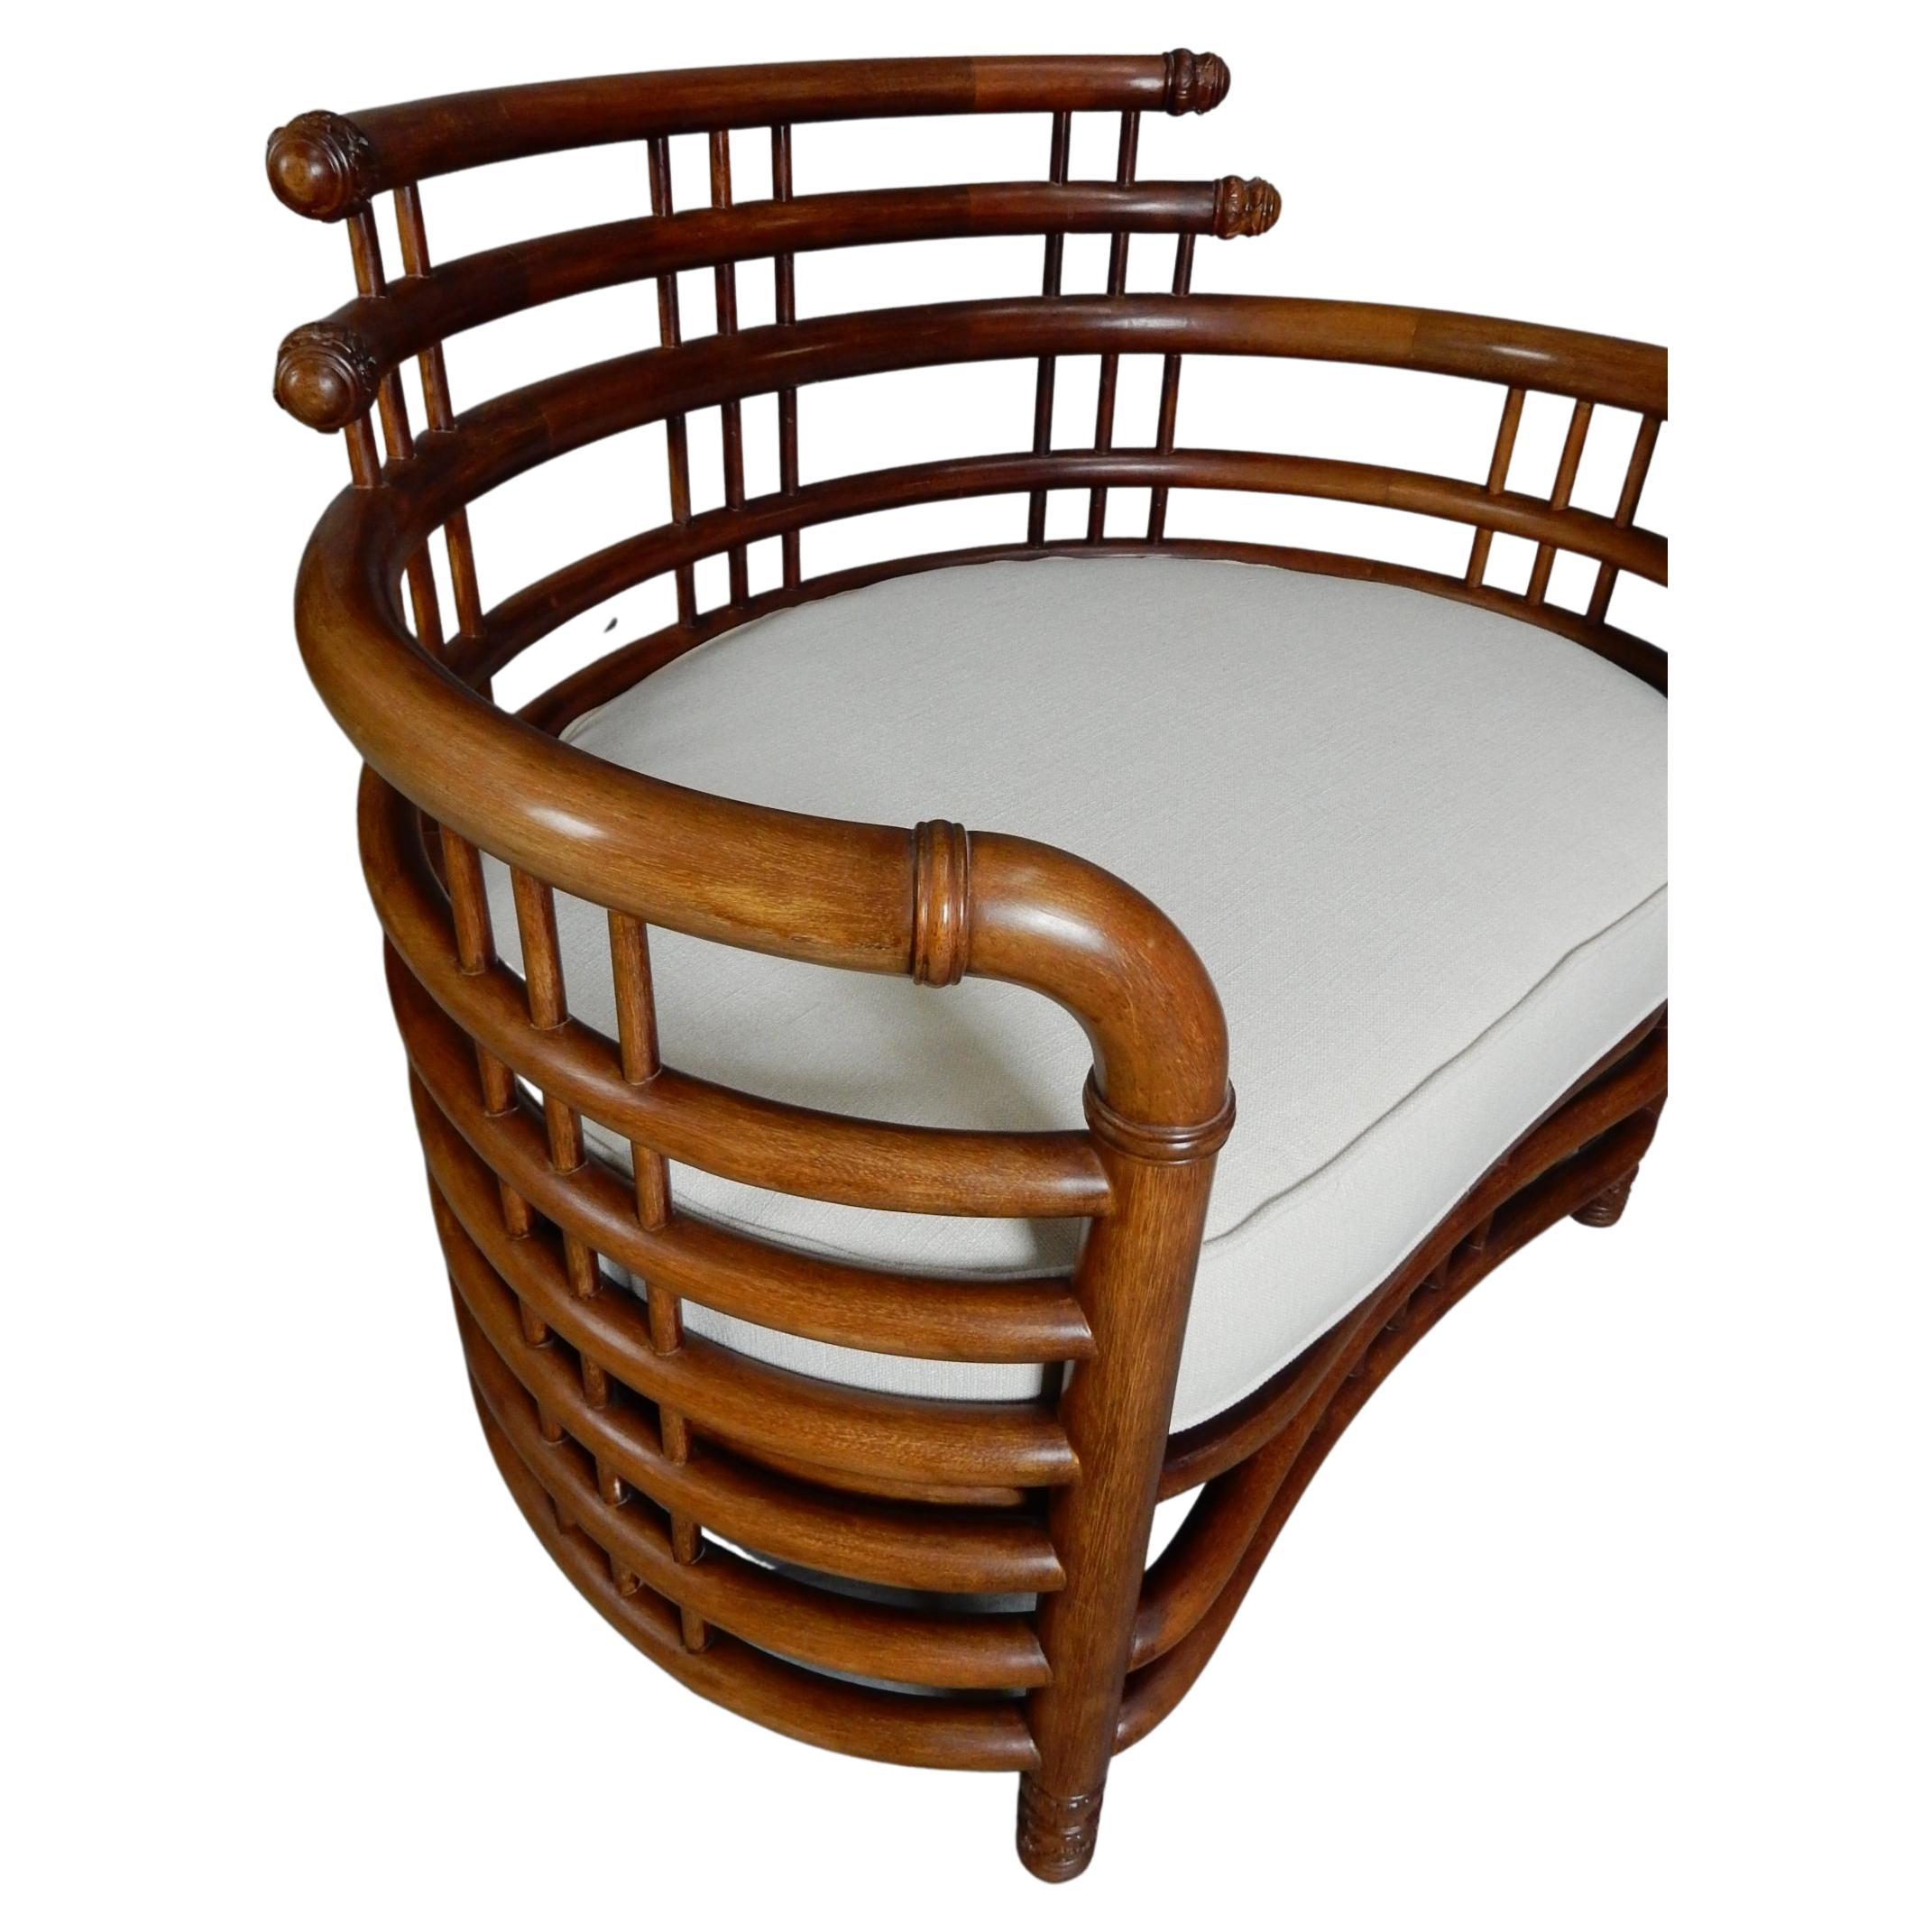 20th Century 1950's, Sculpted Bentwood Teak Birdcage Lounge Chairs